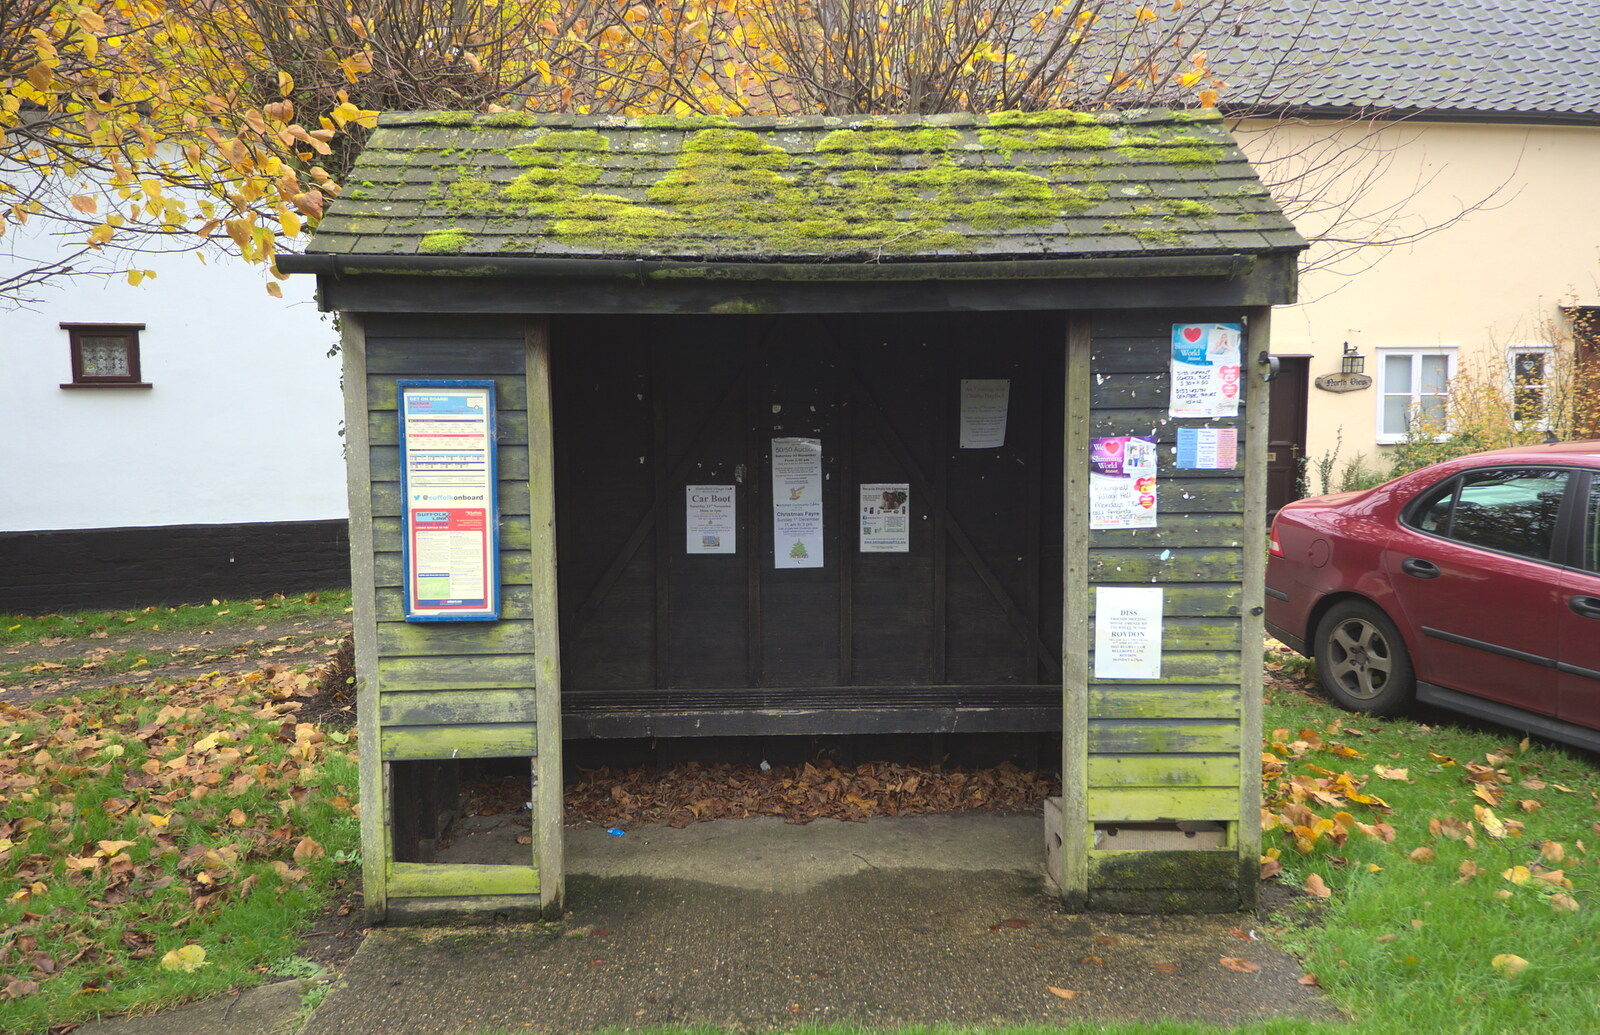 More Building and Palgrave Playground, Suffolk - 24th November 2013: The bus stop in Palgrave